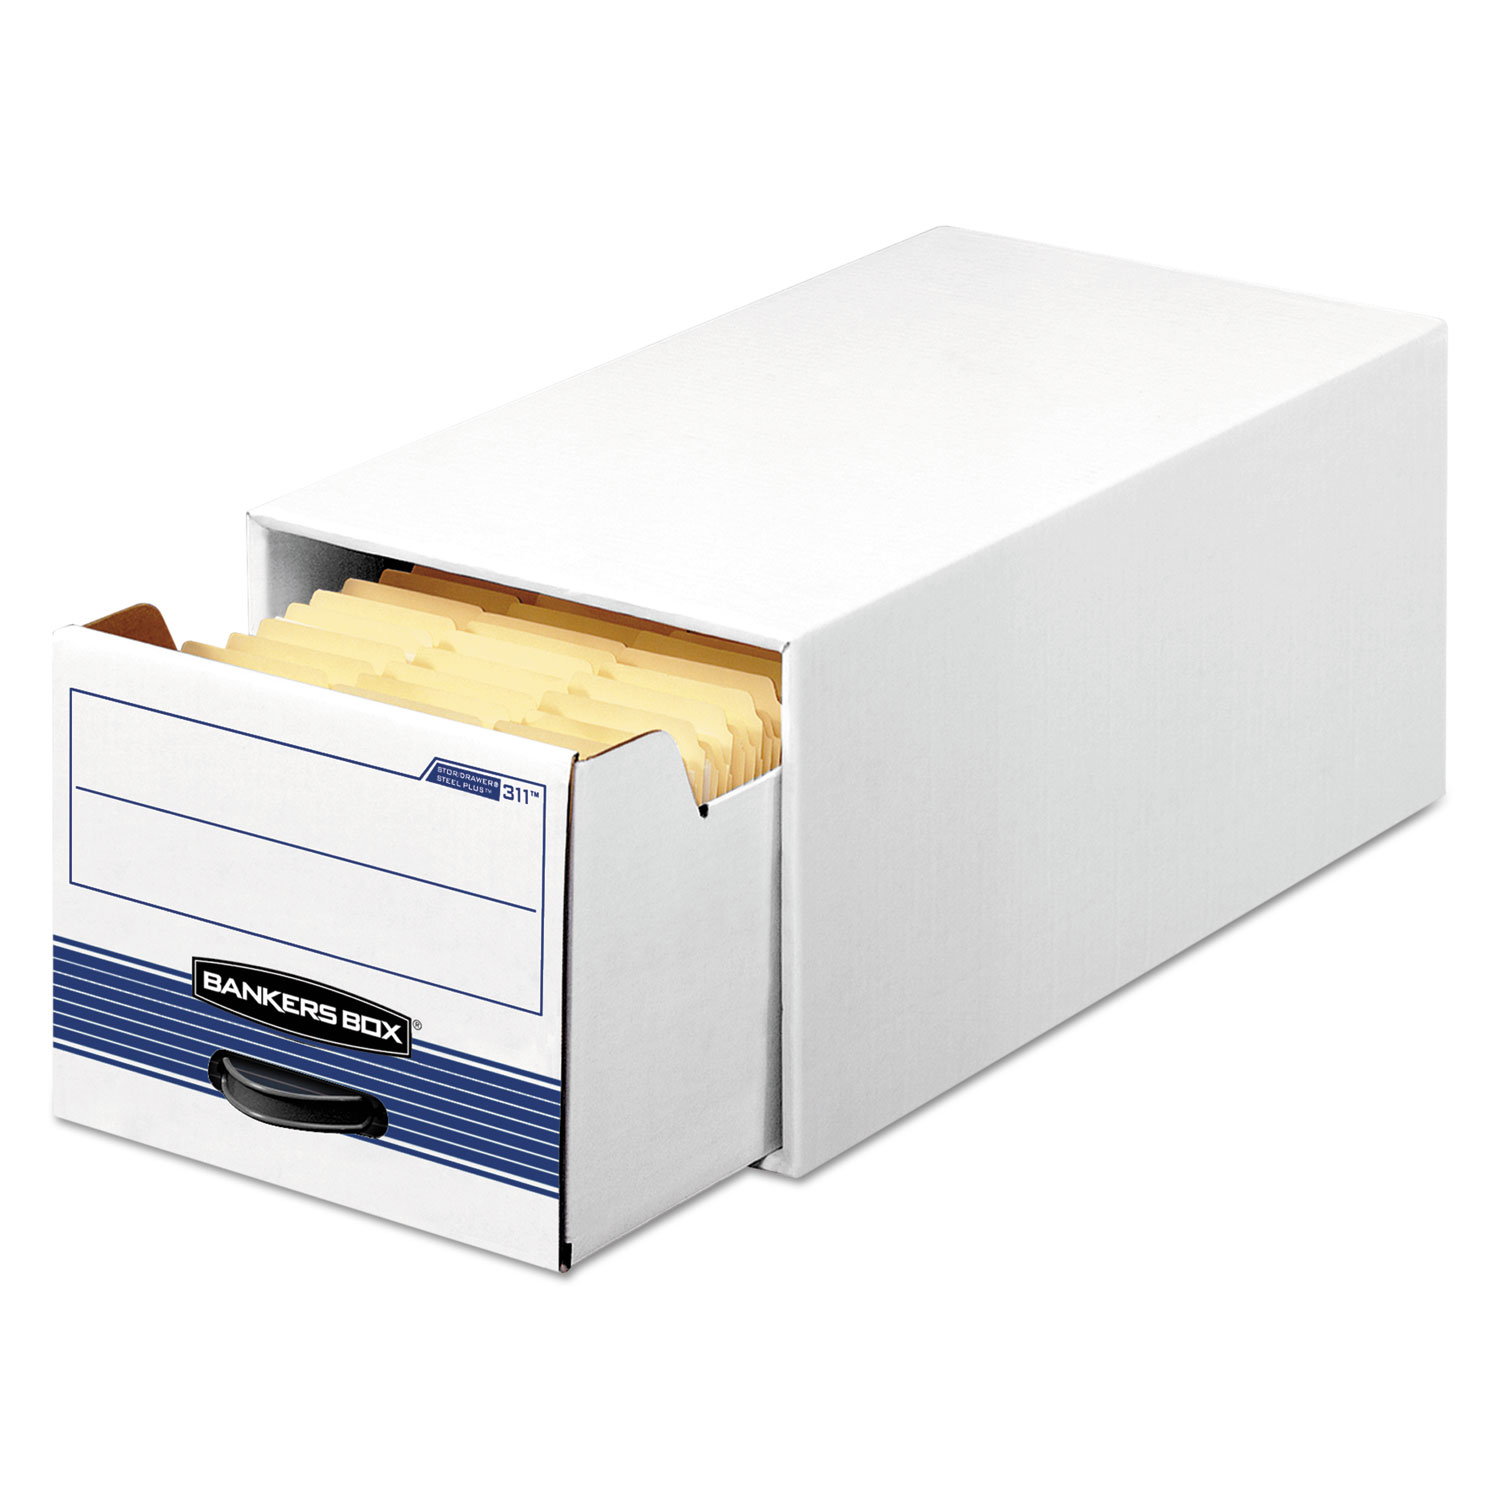  Bankers Box 00306 STOR/DRAWER STEEL PLUS Extra Space-Savings Storage Drawers, Letter Files, 10.5 x 25.25 x 6.5, White/Blue, 12/Carton (FEL00306) 